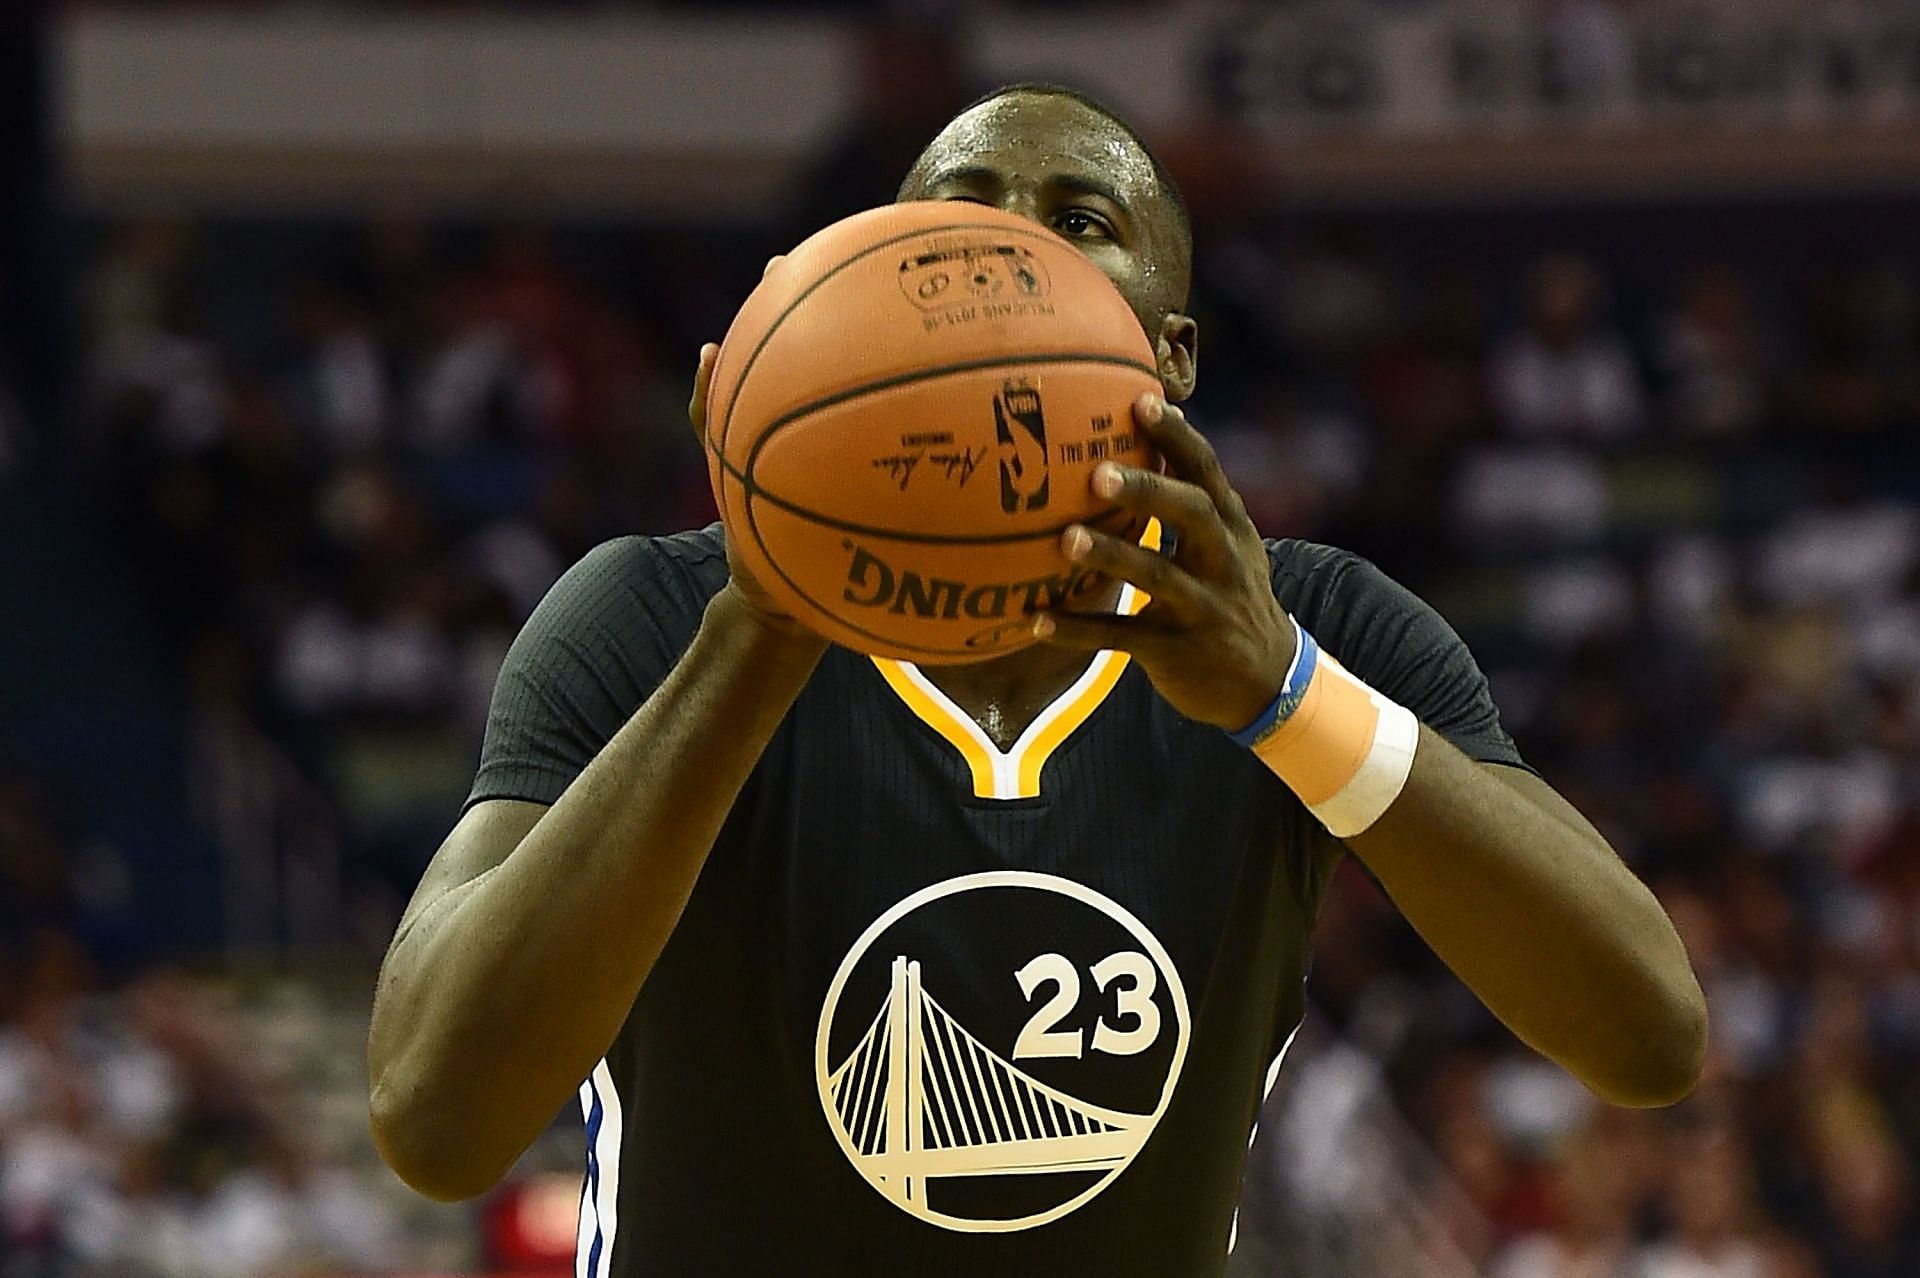 Draymond Green of the Golden State Warriors has struggled in the free throw line to start the season.